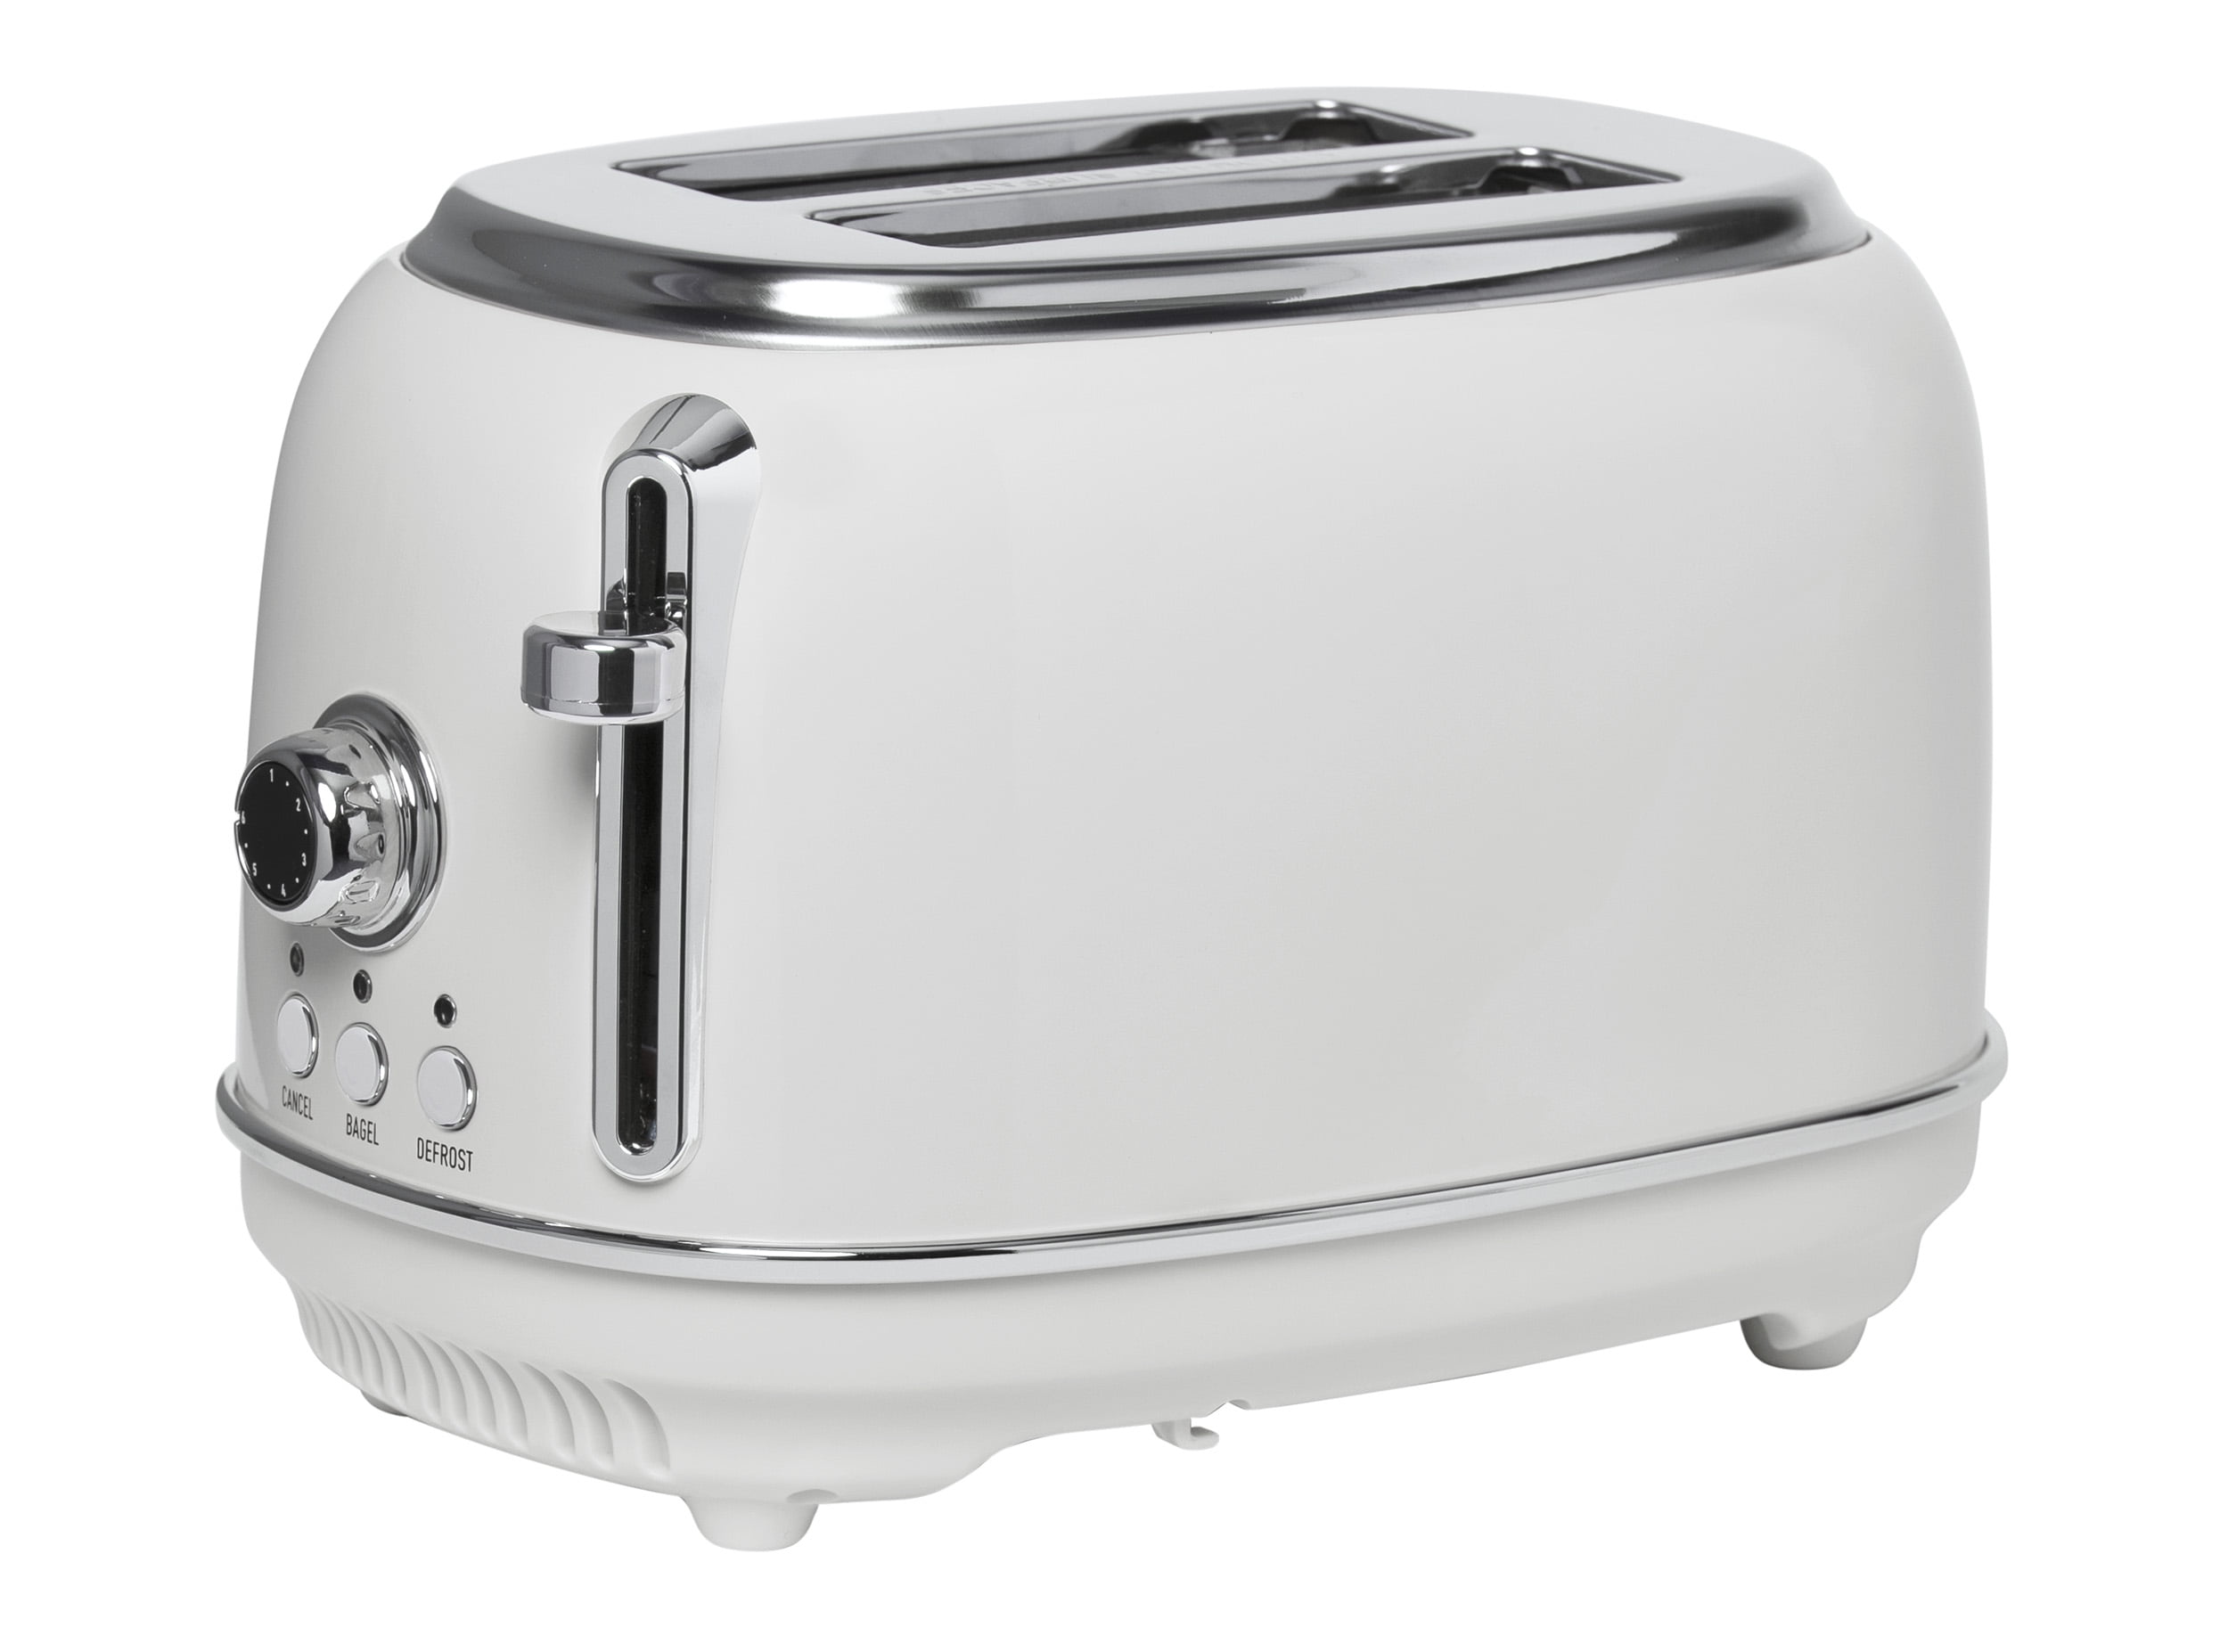 Dropship 2-Slice Toaster With 1.5 Inch Wide Slot, 5 Browning Setting And 3  Function: Bagel, Defrost & Cancel, Retro Stainless-Steel Style, Toast Bread  Machine With Removable Crumb Tray, Silver to Sell Online